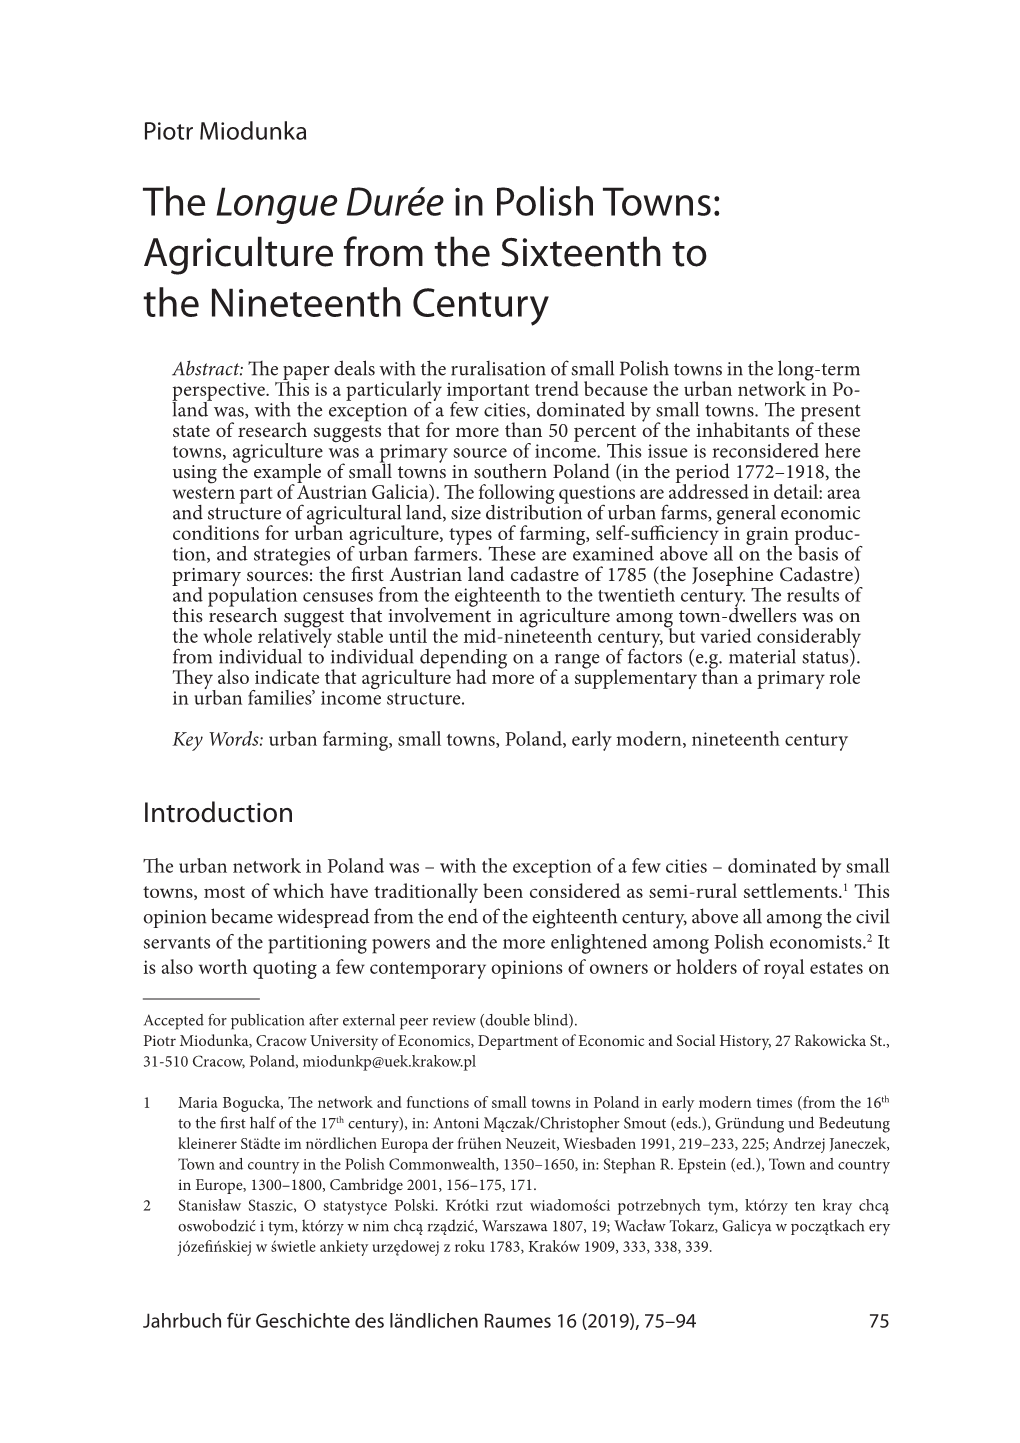 Agriculture from the Sixteenth to the Nineteenth Century